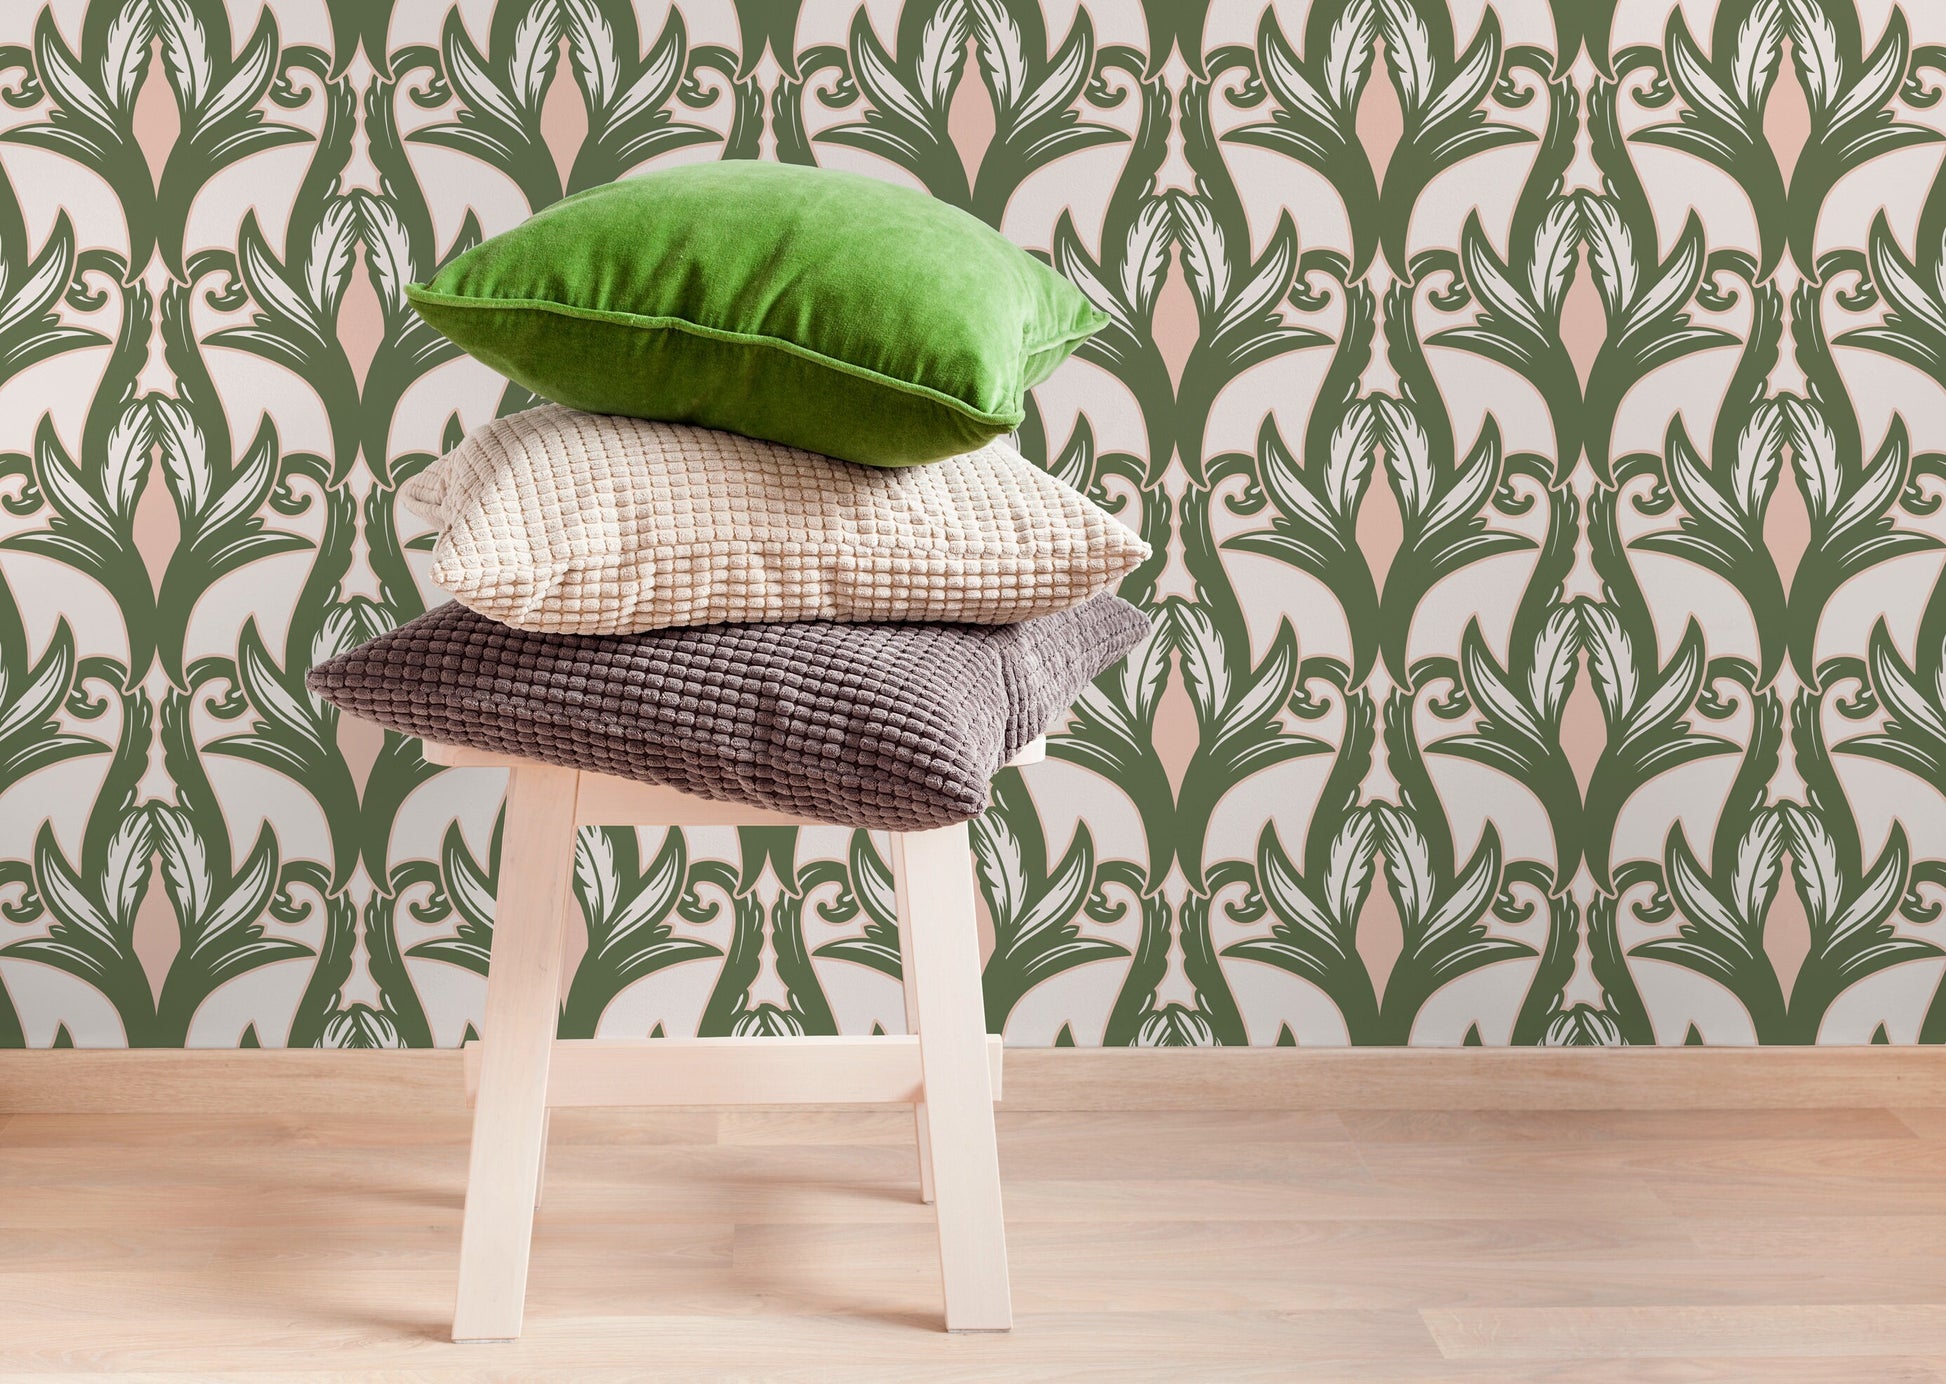 Wallpaper Removable Wallpaper Peel and Stick Wallpaper Wall Decor Home Decor Wall Art Printable Wall Art / Green Vintage Wallpaper - C288